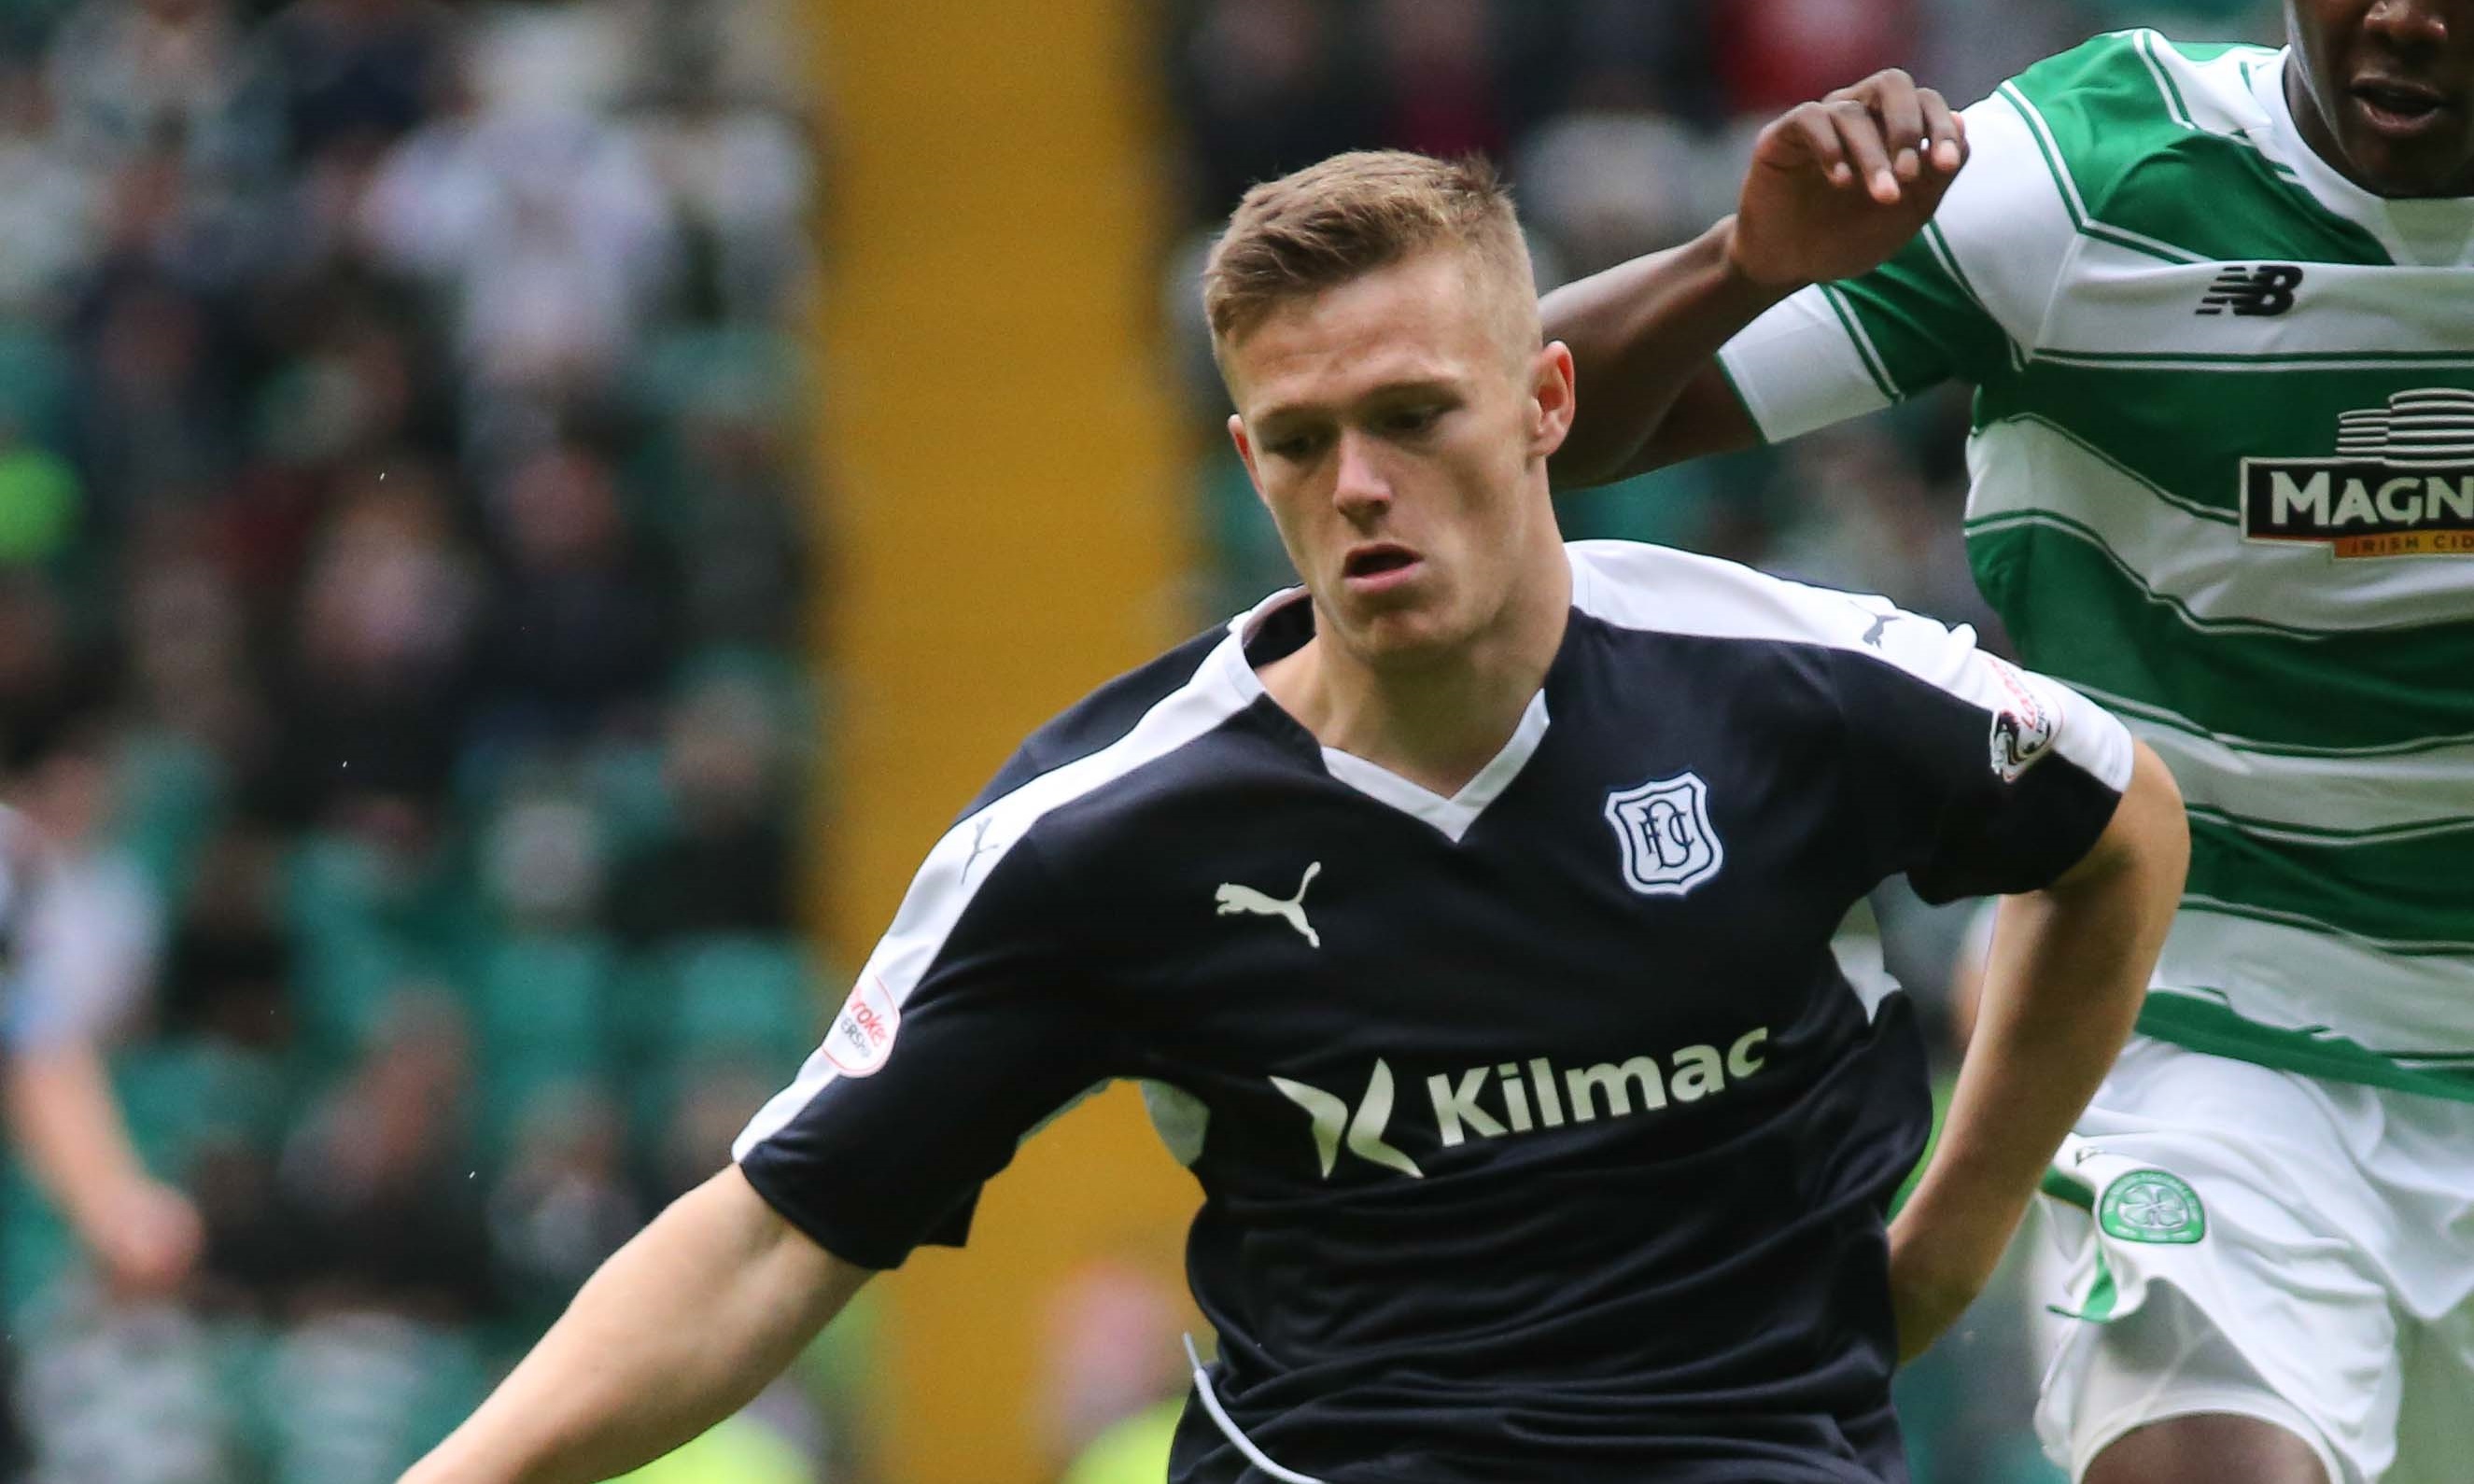 Rhys Healey in action for Dundee against Celtic during his loan spell at that club earlier in the season. Whether he is seen as a possible first team player this season must be doubtful, but he certainly didn't suffer in comparison to Messts Saadi and Zohore yesterday. Healey was one of a few man of the match candidates for me along with full back Rees and Tutonda and midfielder Robbie Patten.